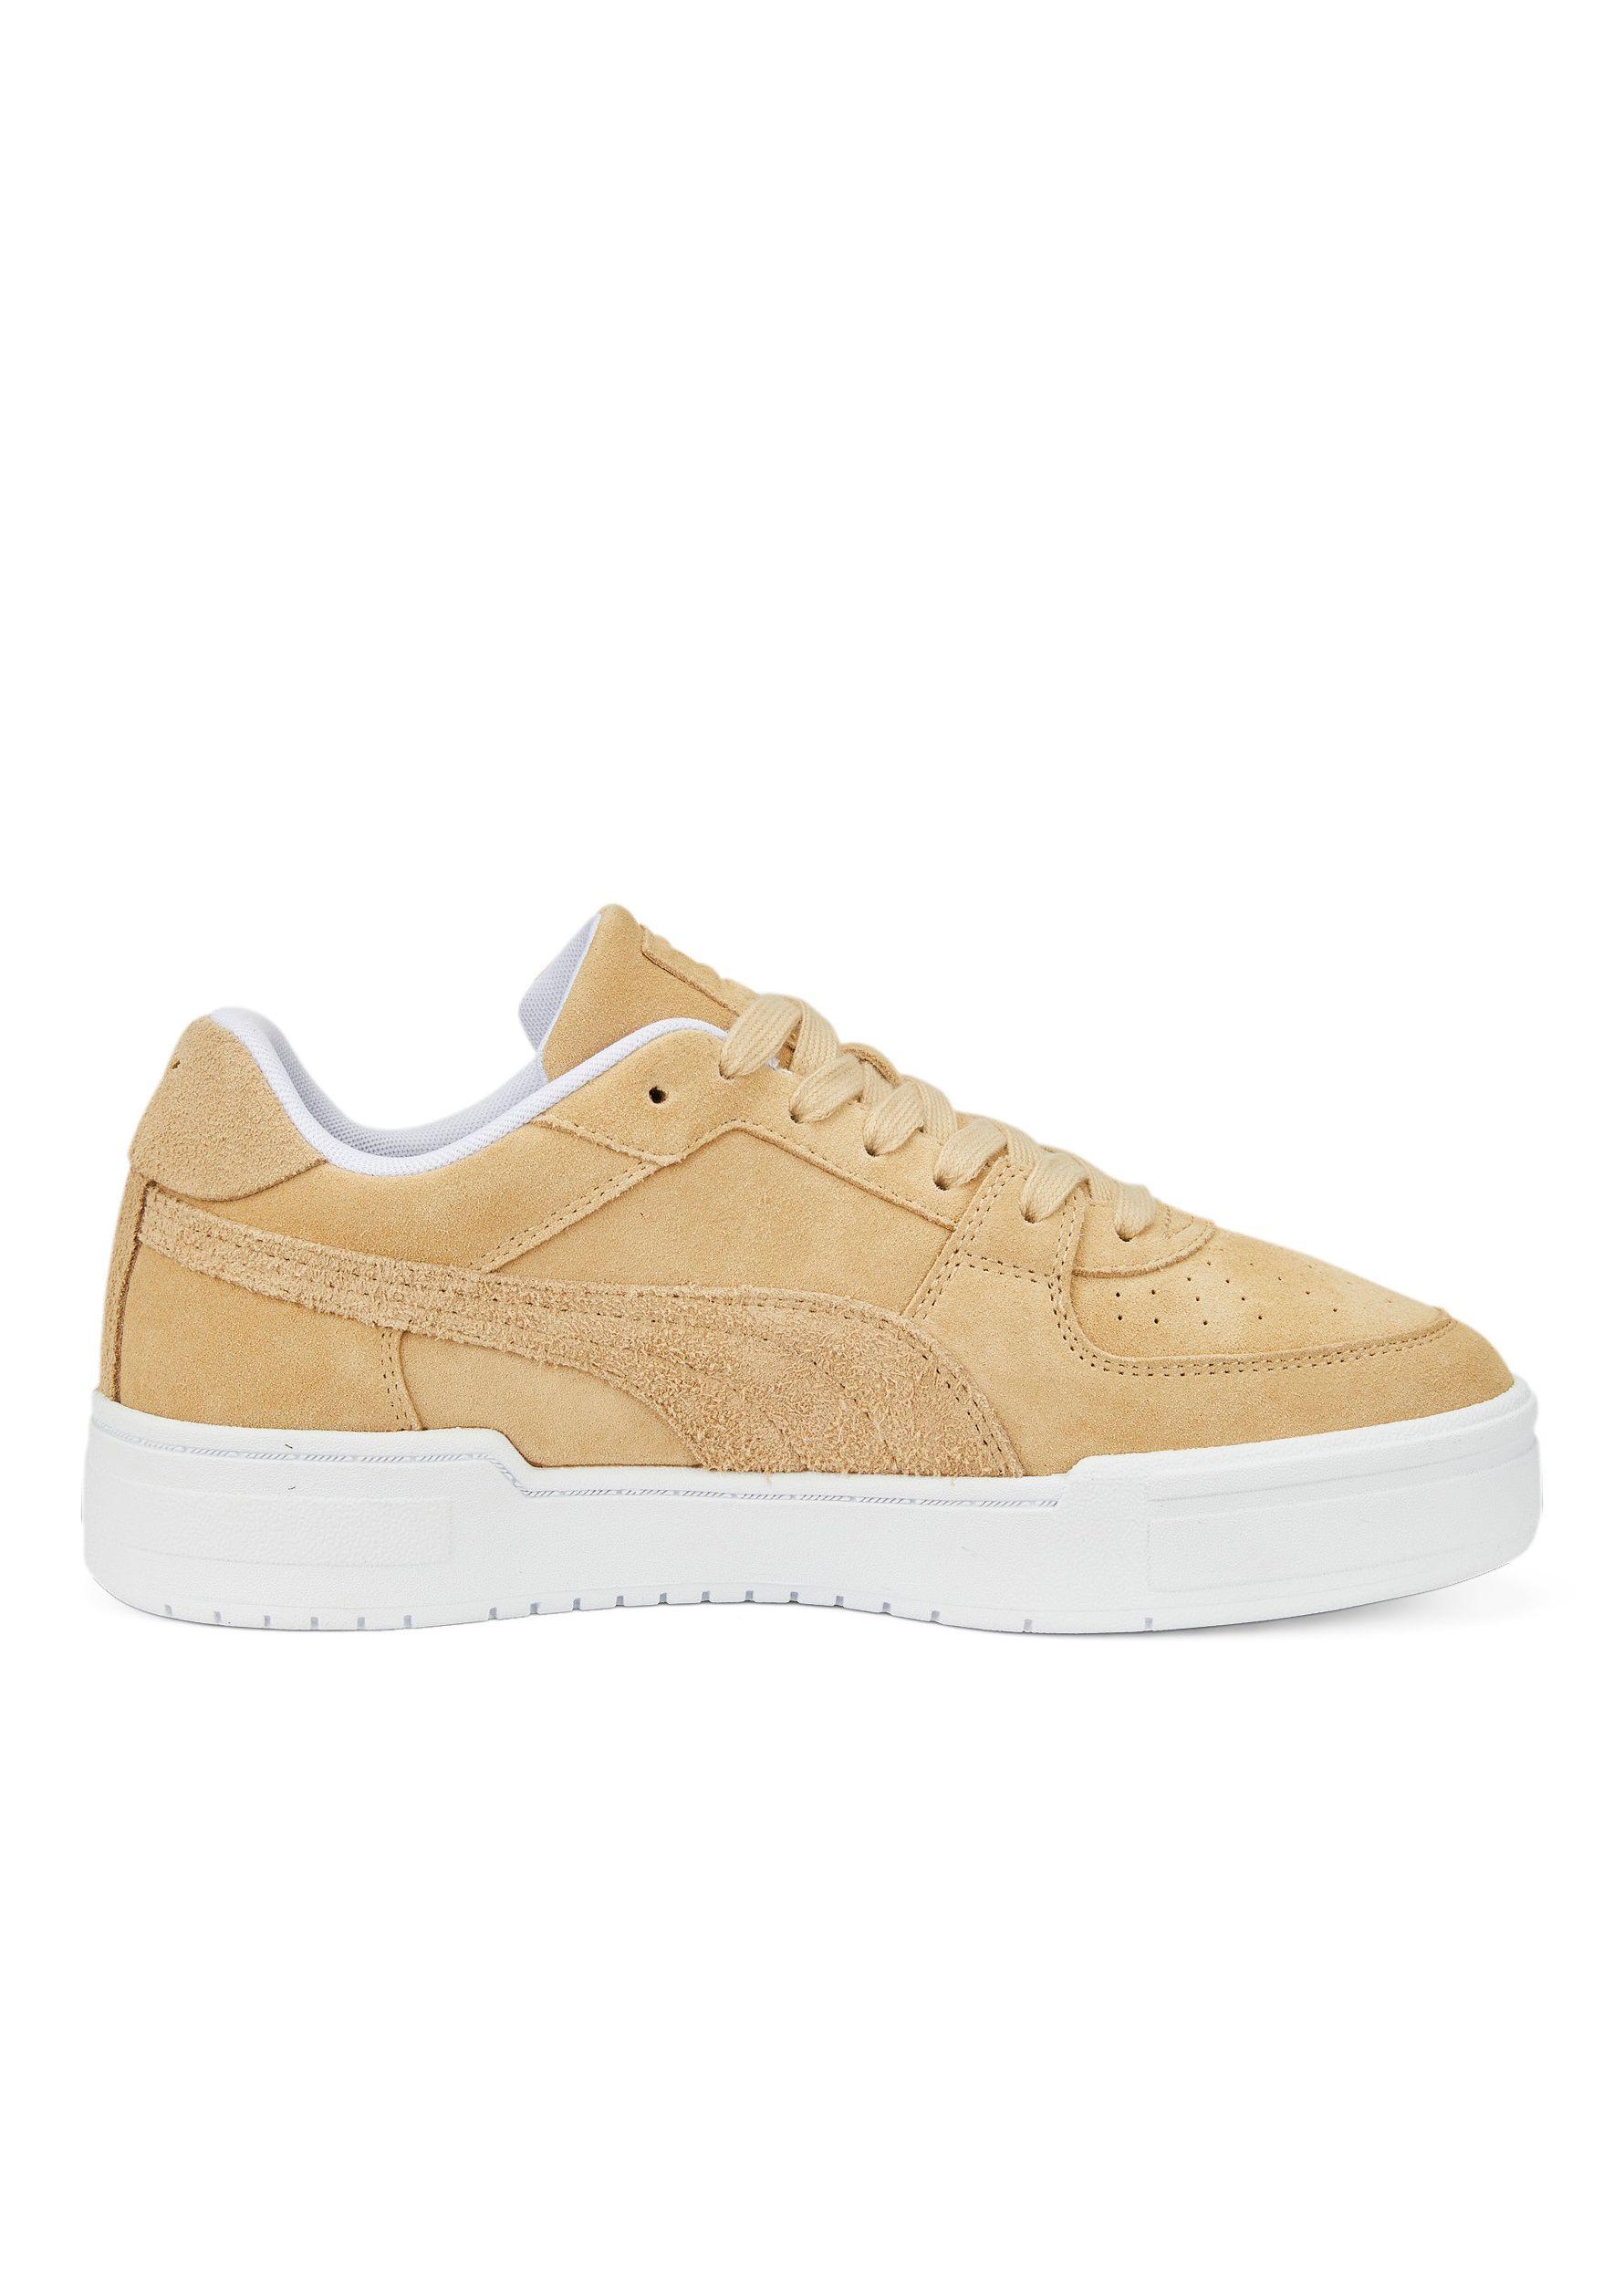 PUMA Ca Pro Suede Sneakers in Natural for Men | Lyst